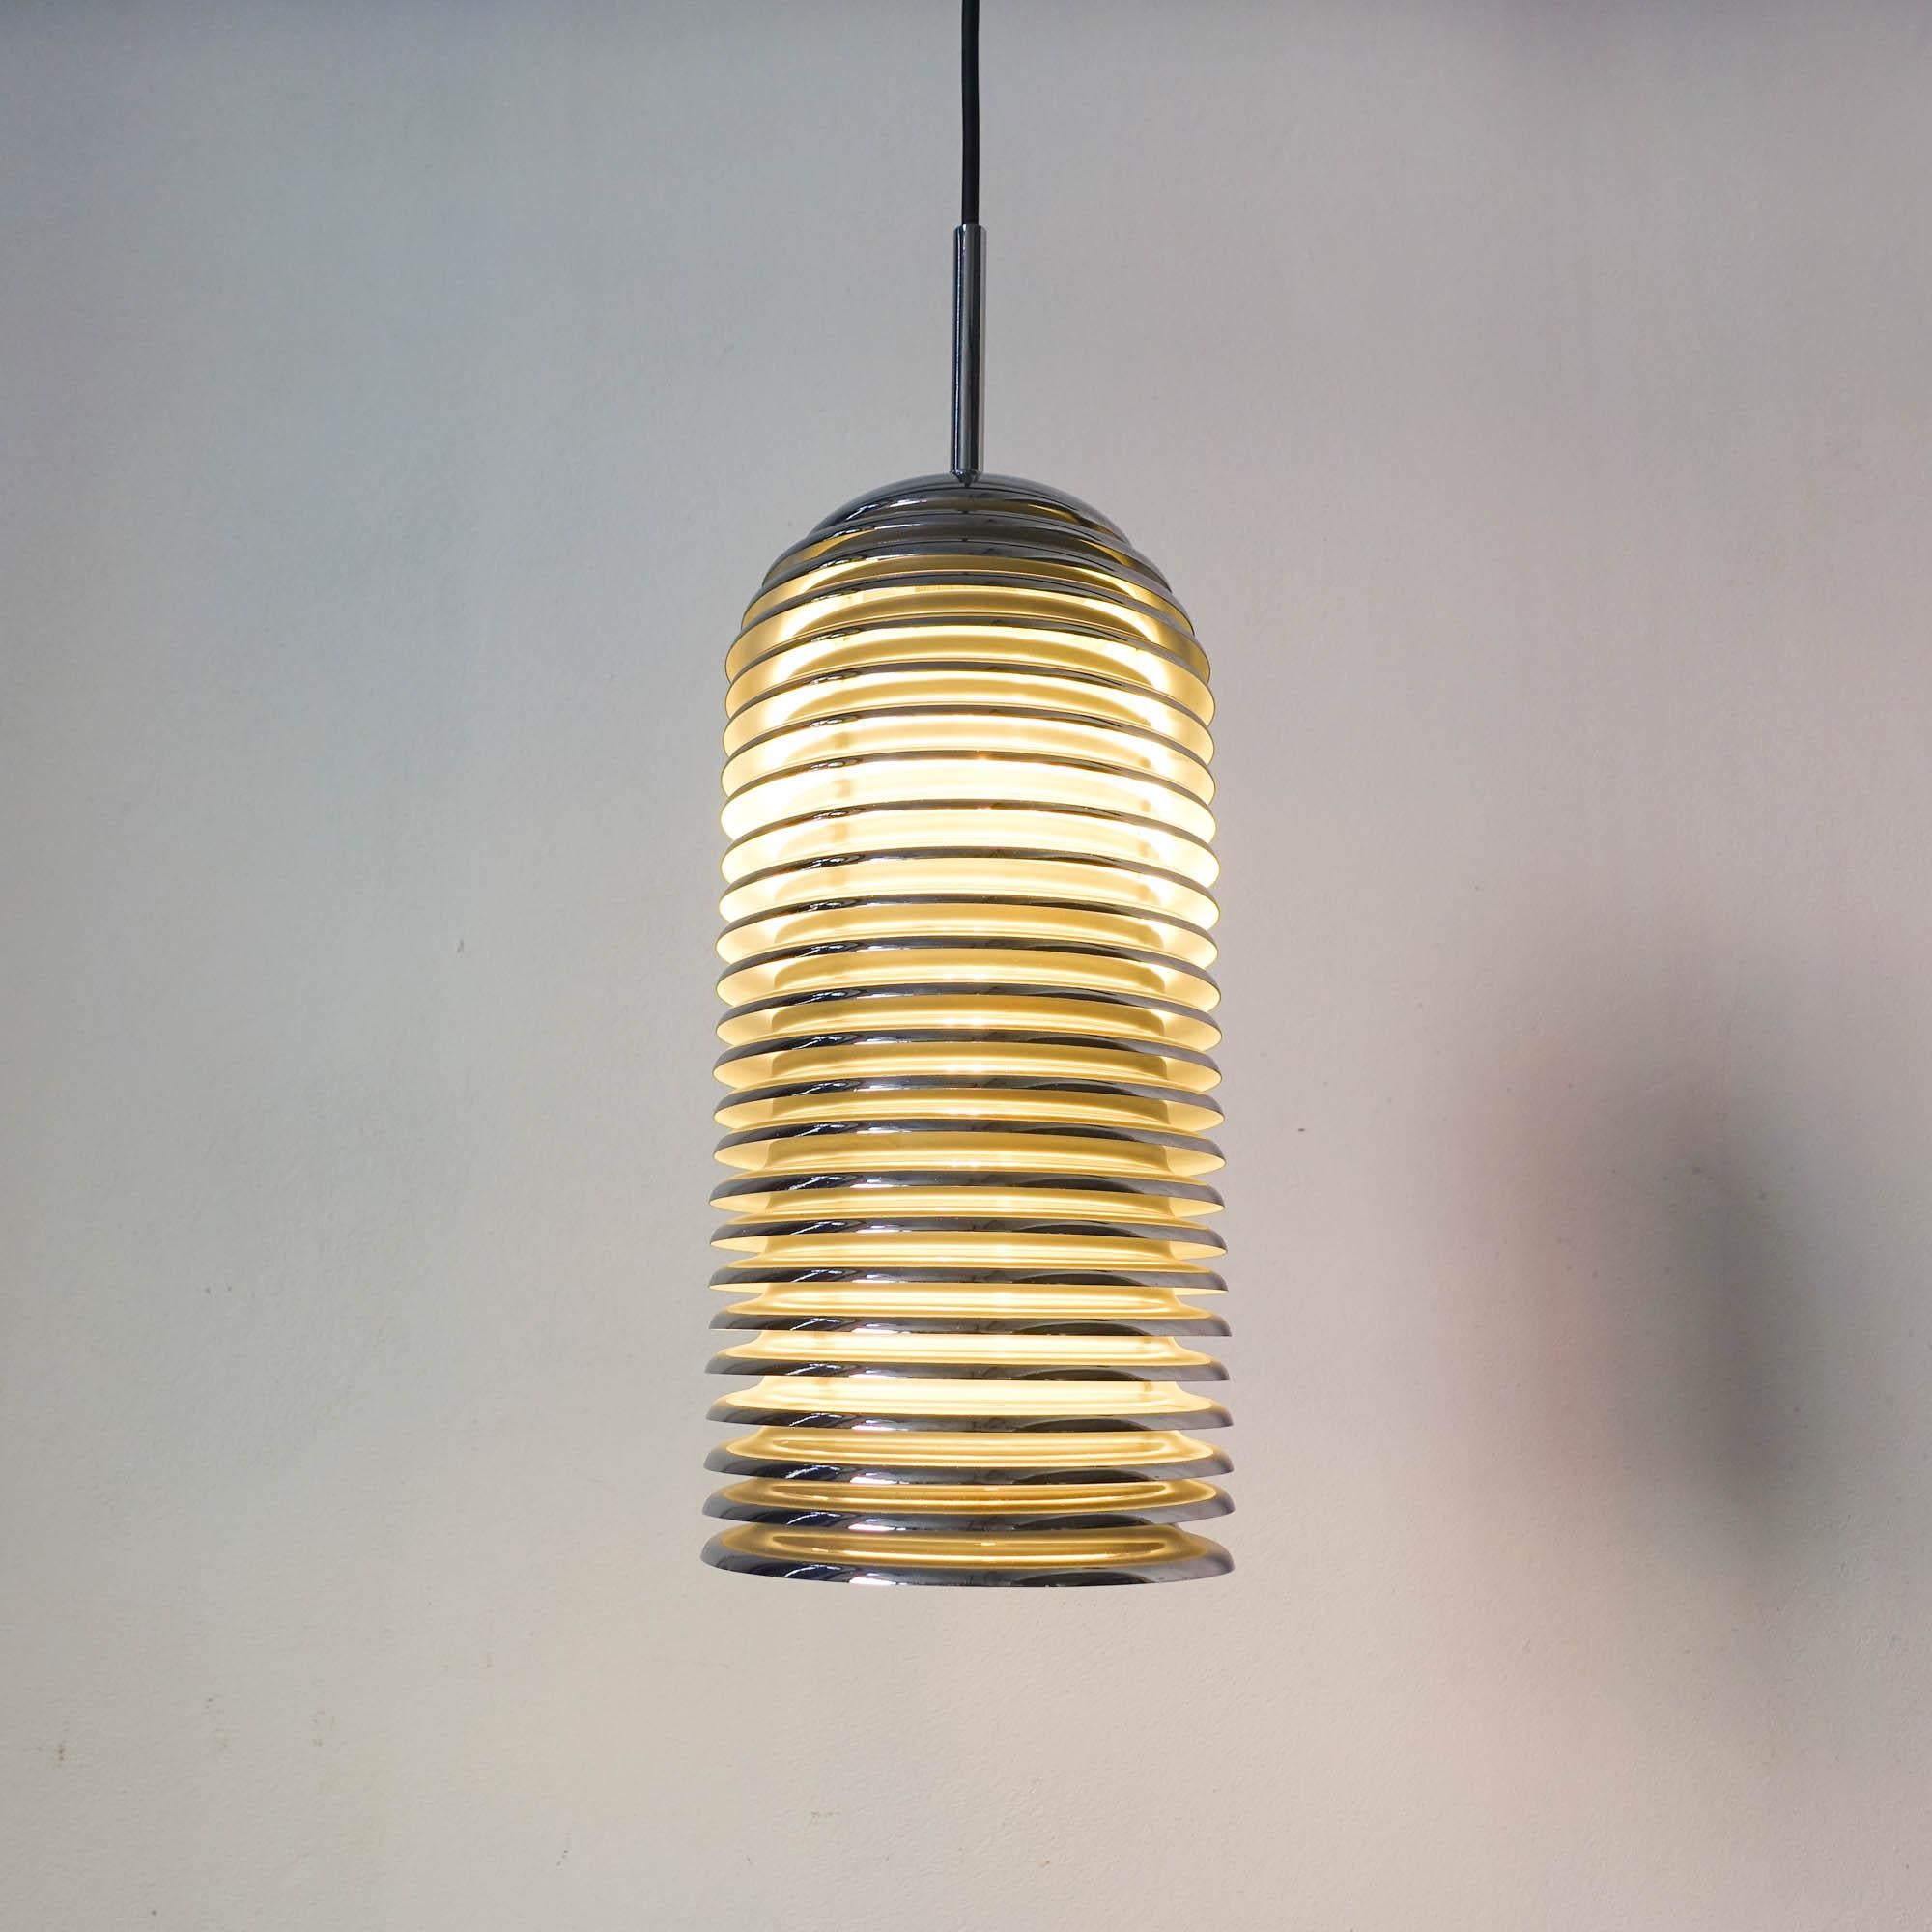 The Saturno pendant lamp was designed by Kazuo Motozawa for Staff Leuchten, during the 1970's. The Saturno Collection won the IF design award in 1972. The light has a 50 cm height chromed metal shade with 24 round rings. It has two standard sockets